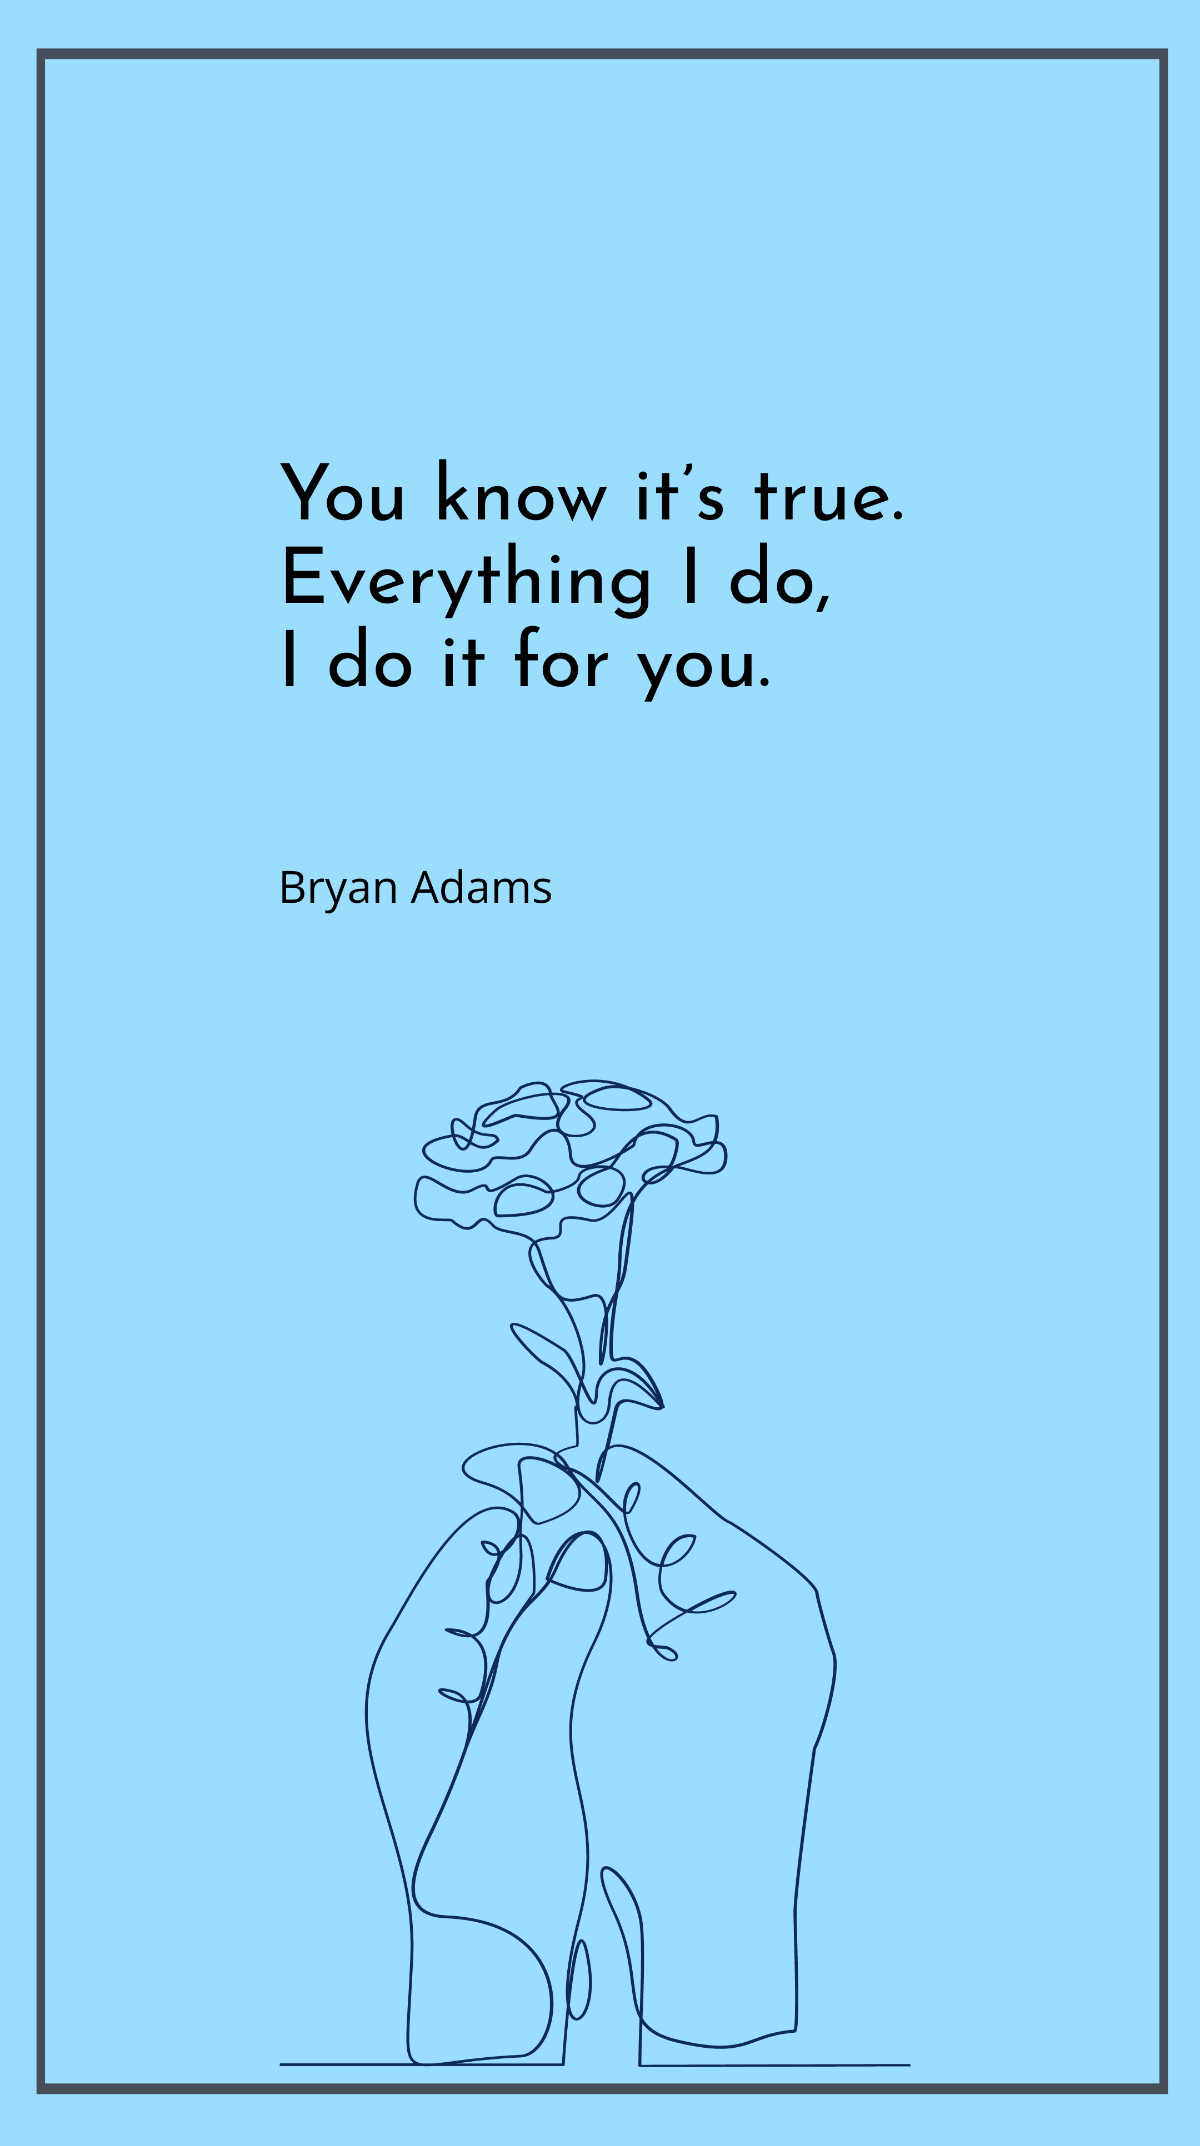 Bryan Adams - “You know it’s true. Everything I do, I do it for you.”